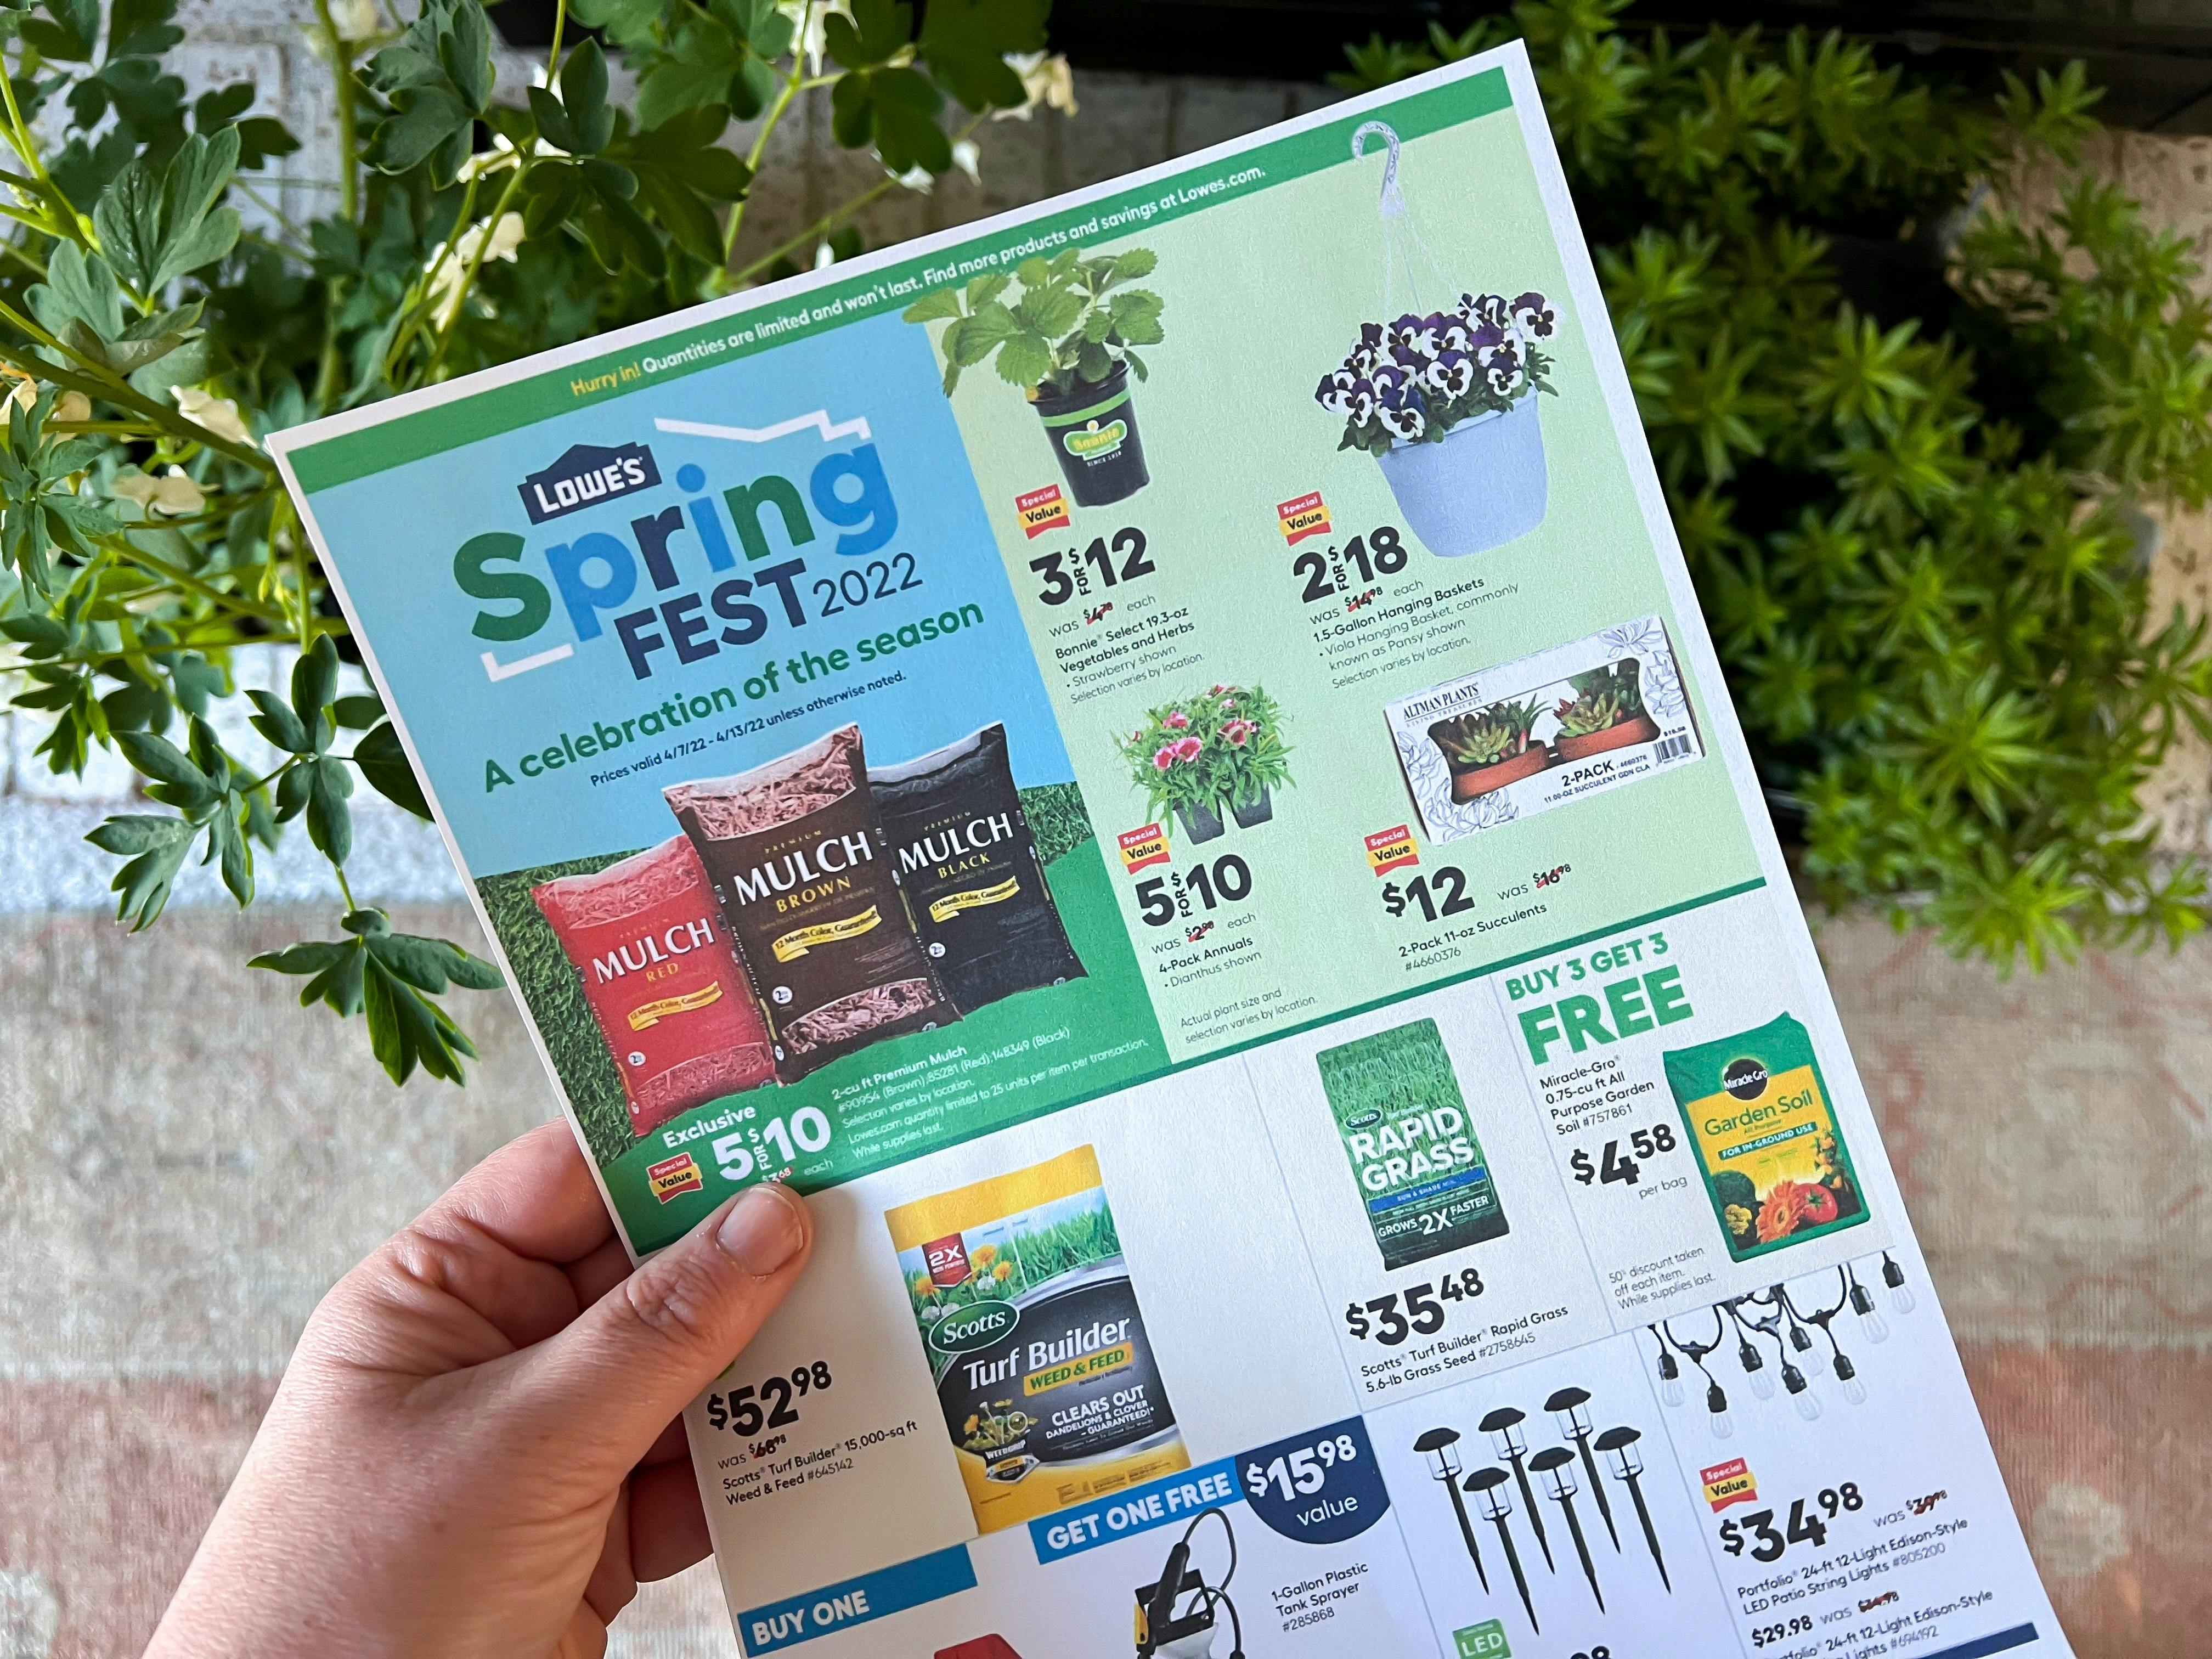 Someone holding a printed ad for Lowe's Springfest 2022